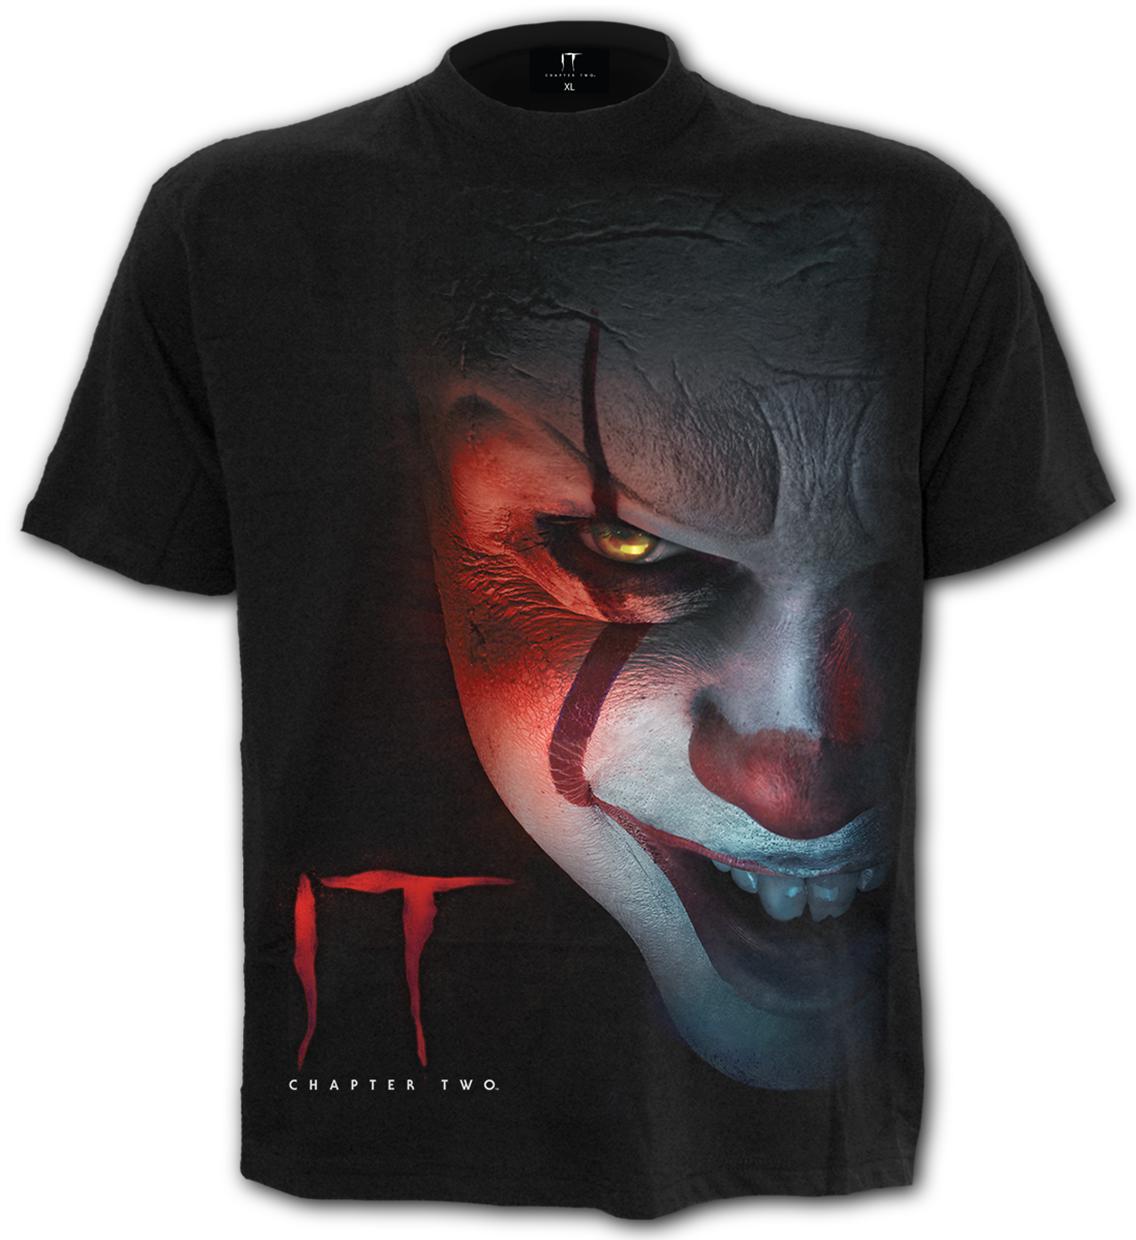 IT - Pennywise - T-Shirt Black